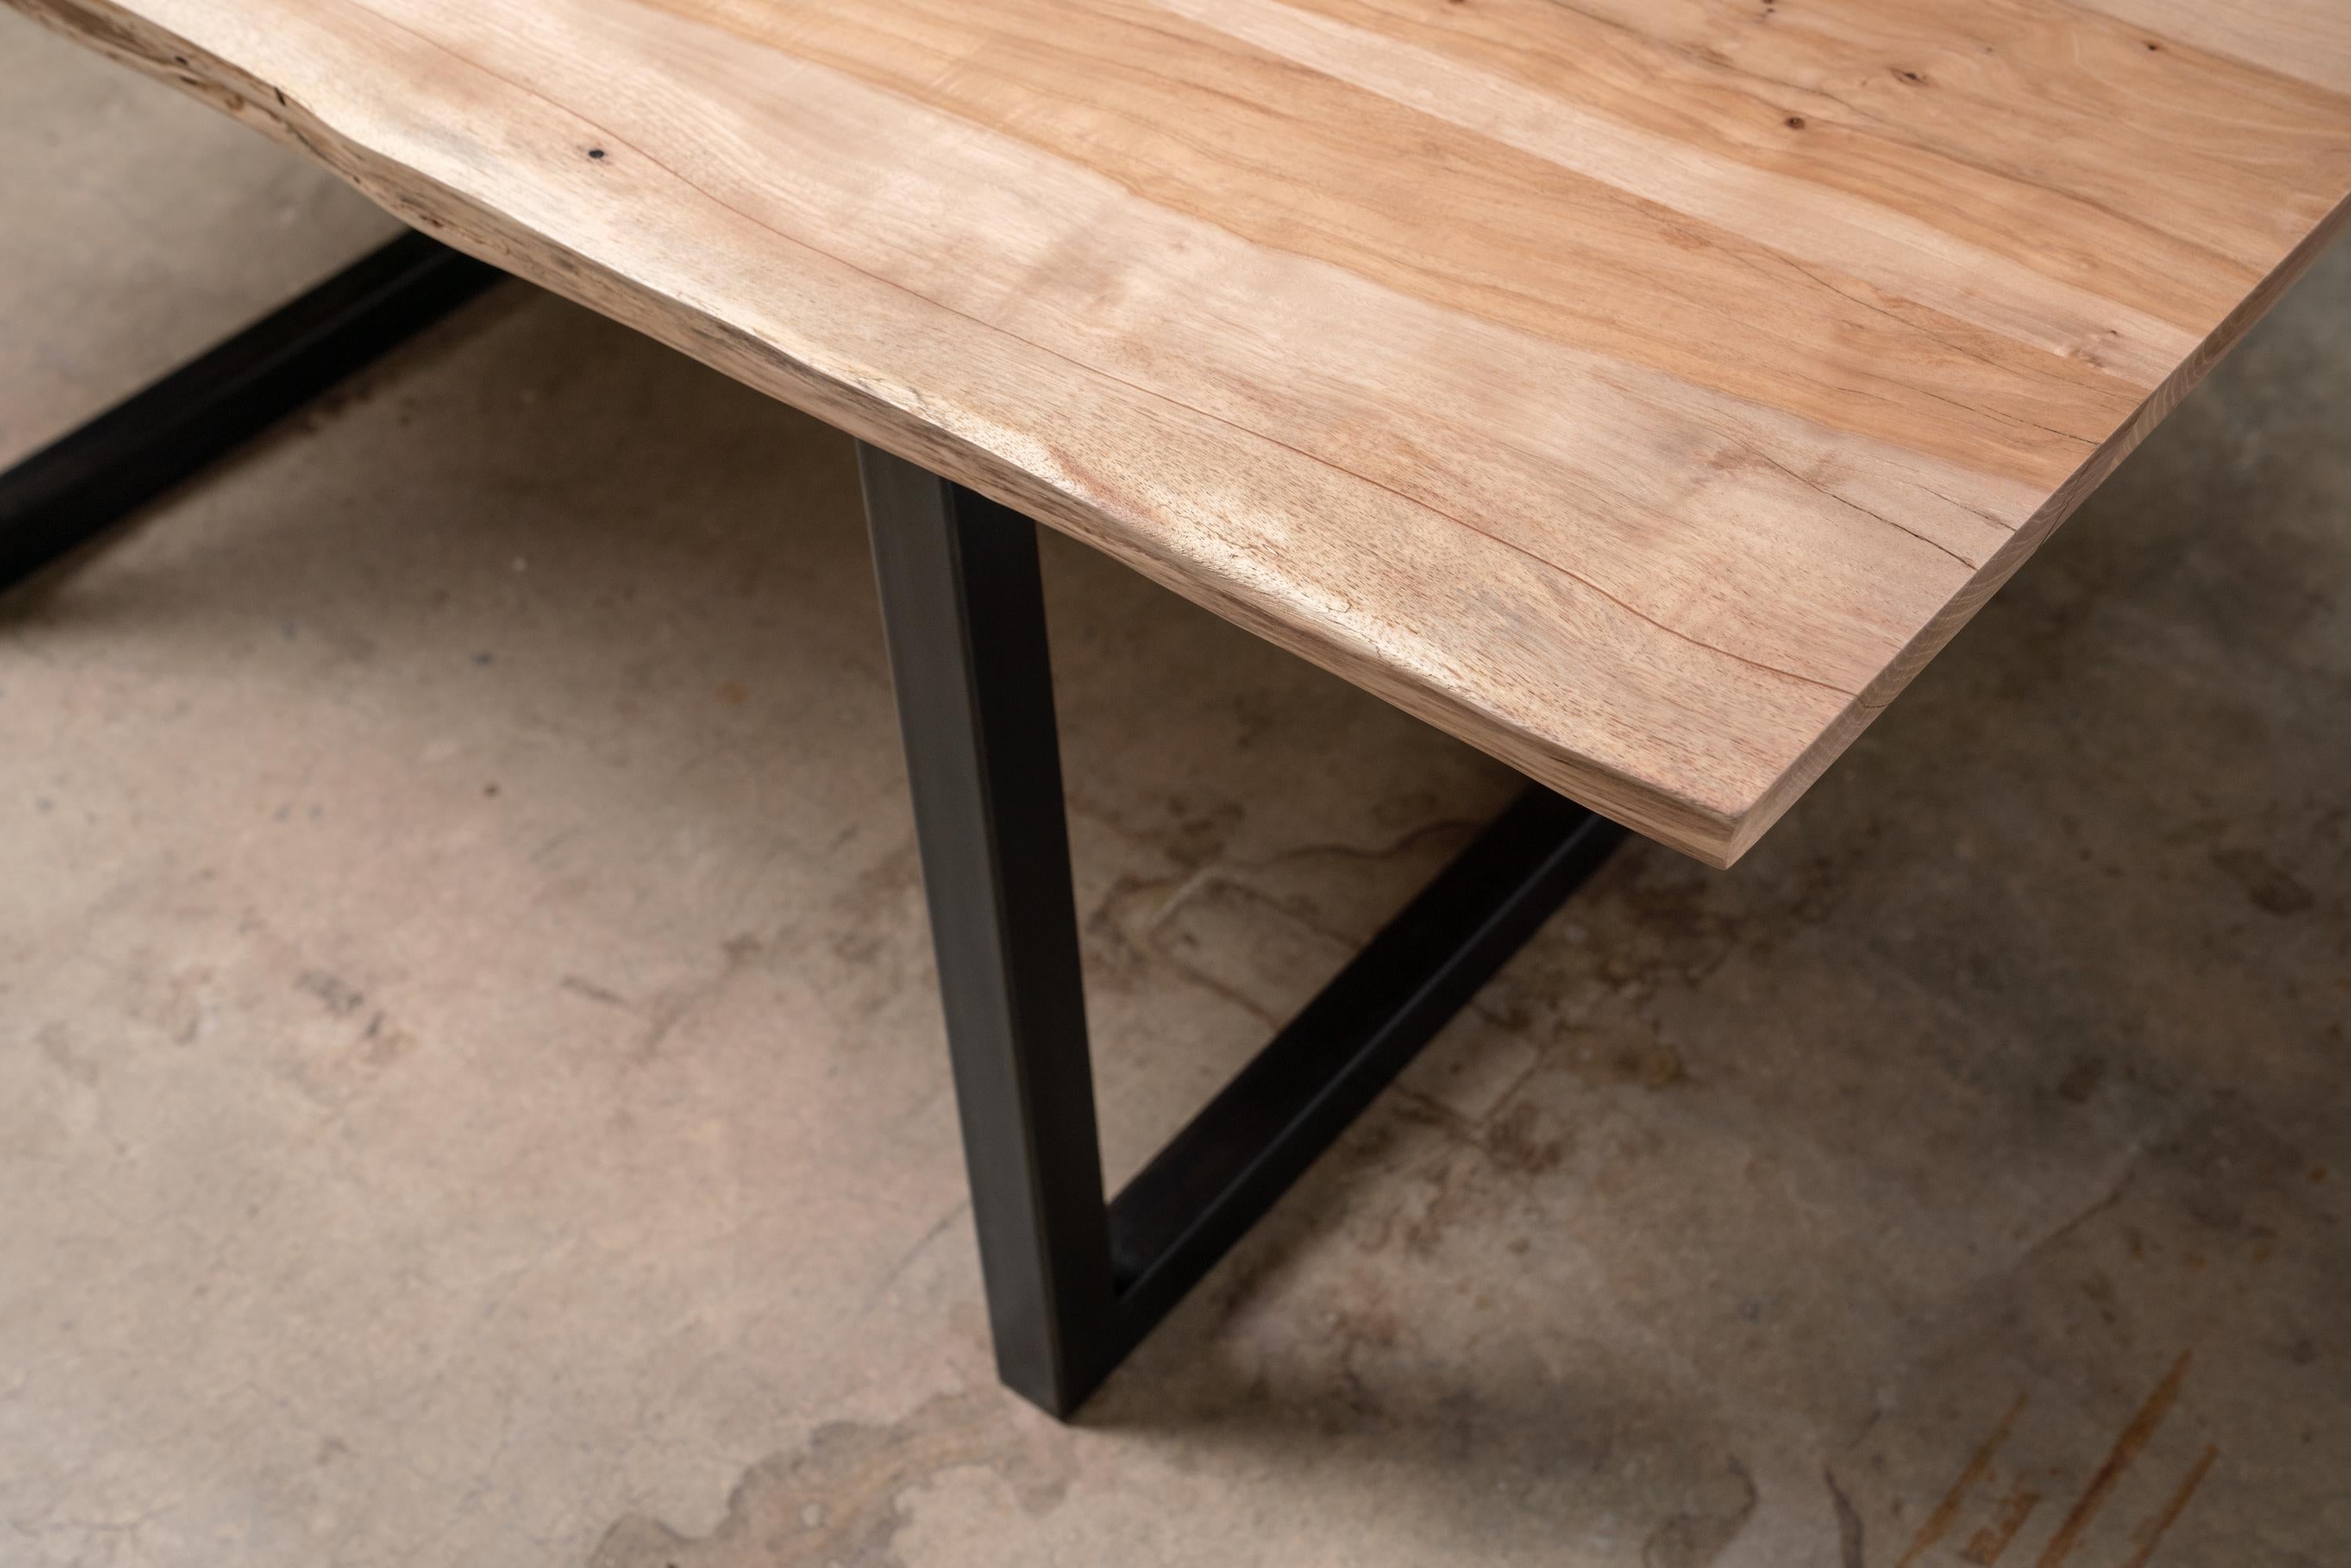 Welded Live Edge Pecan Table Clear Finish on Modern Black Steel Square Base For Sale